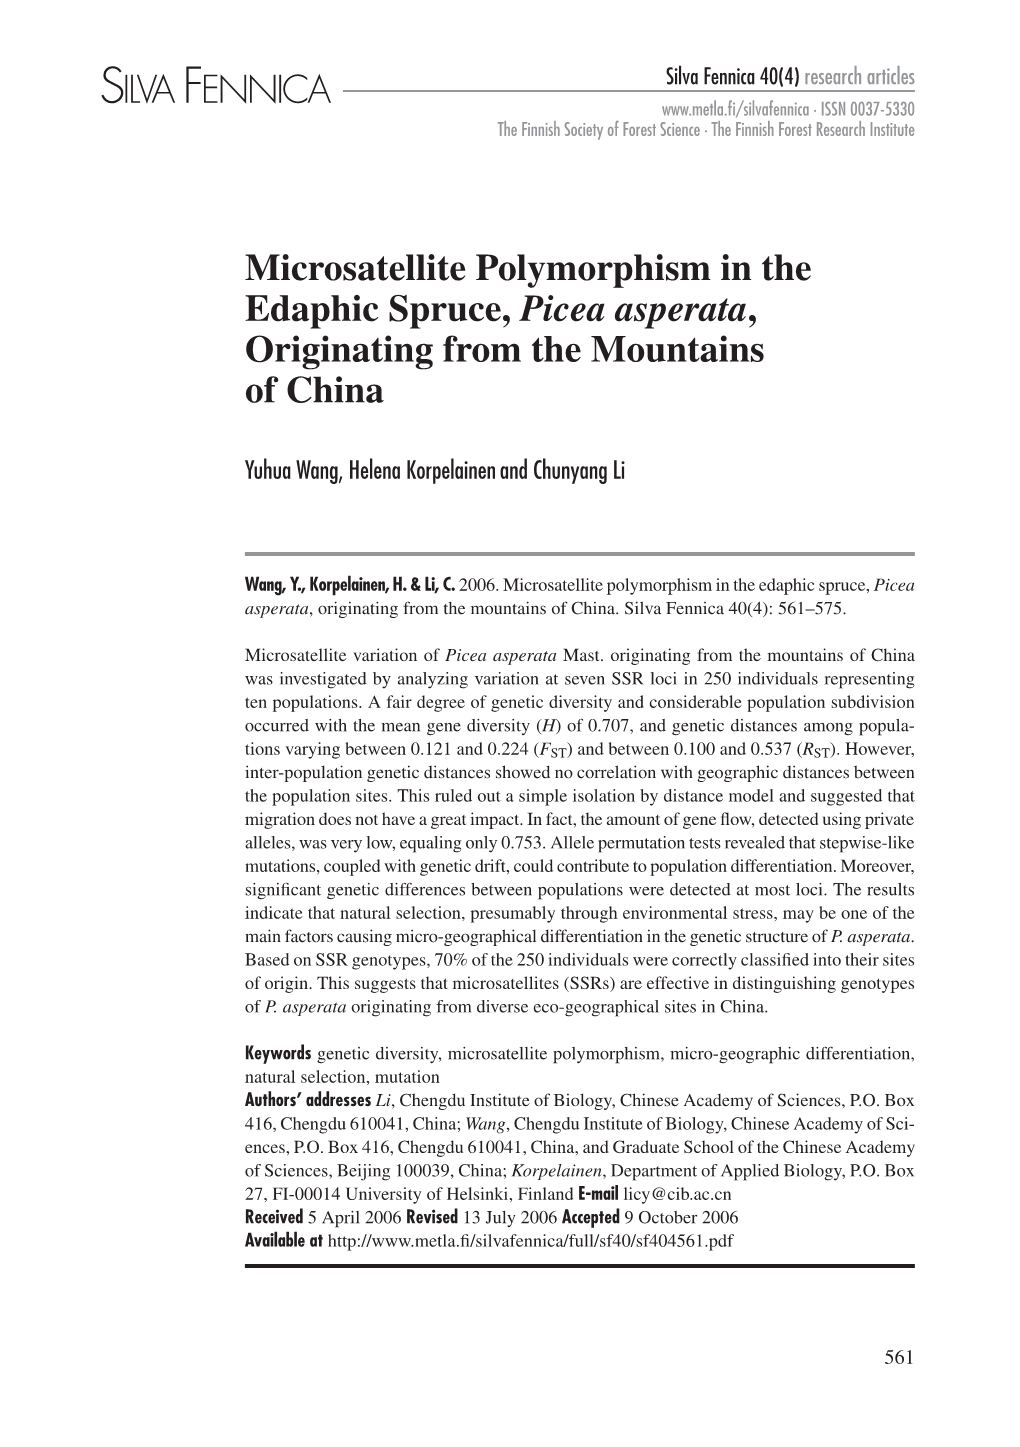 Microsatellite Polymorphism in the Edaphic Spruce, Picea Asperata, Originating from the Mountains of China